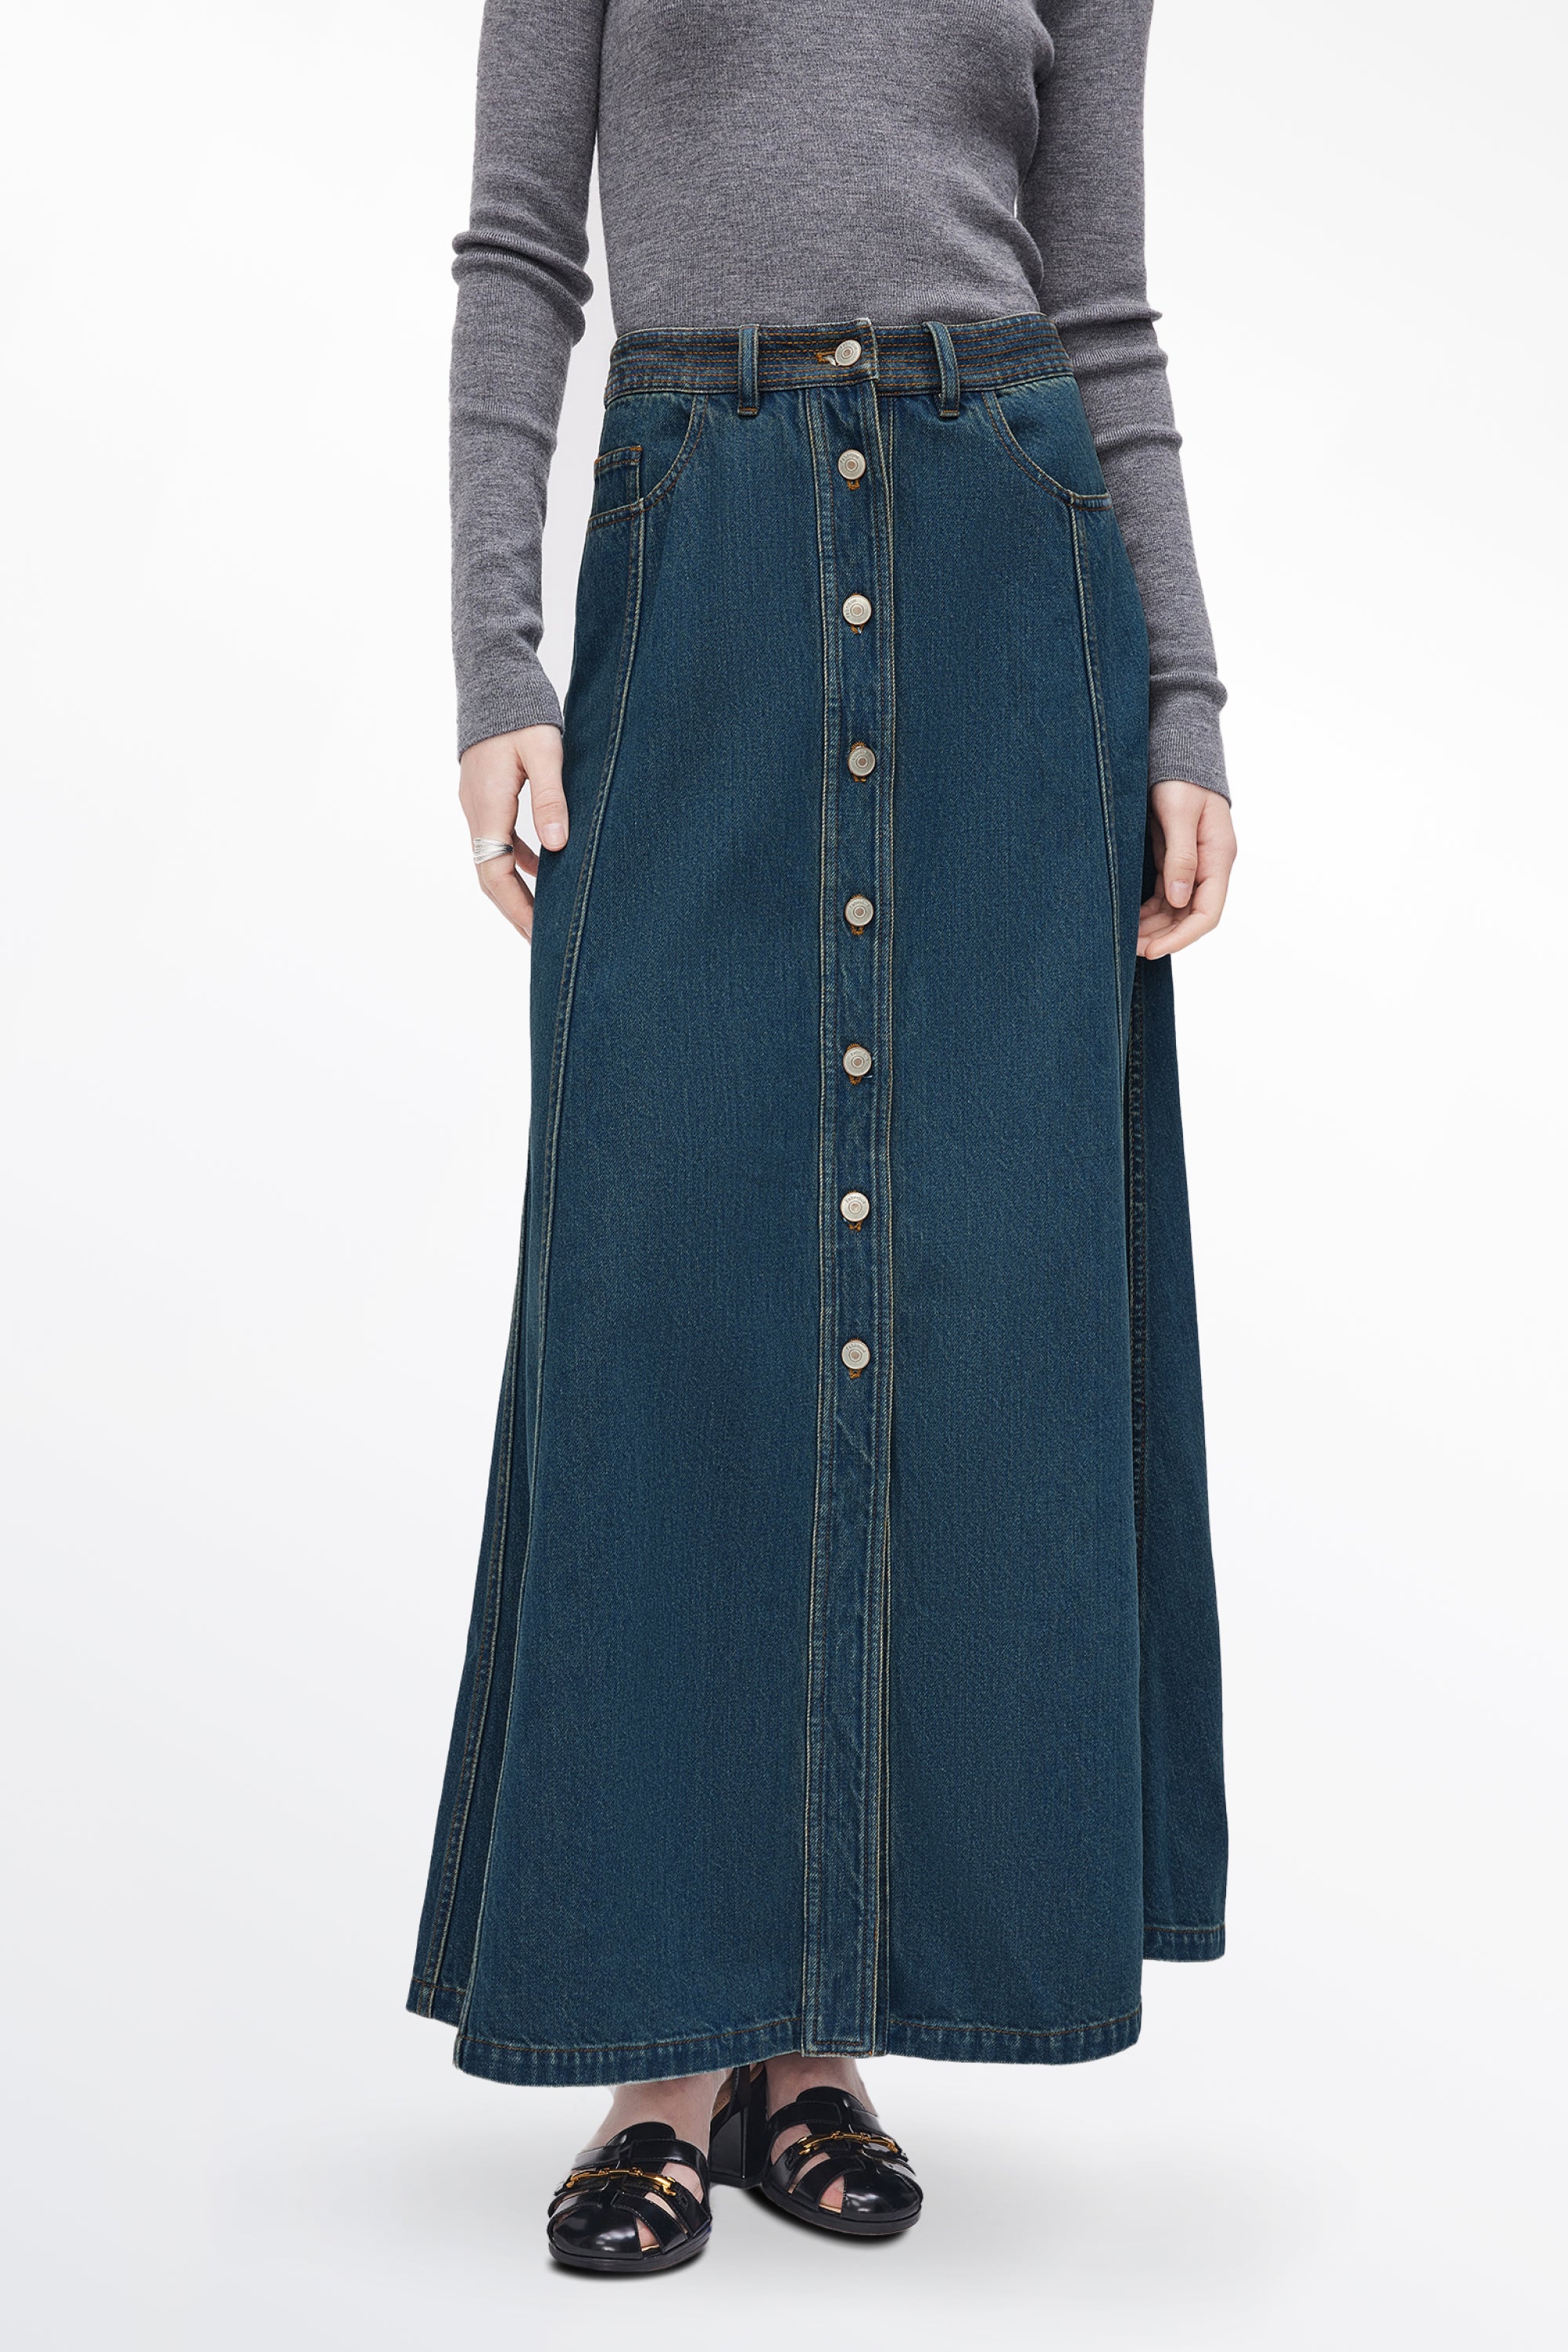 Bailey Pocketed Skirt in Cotton Denim